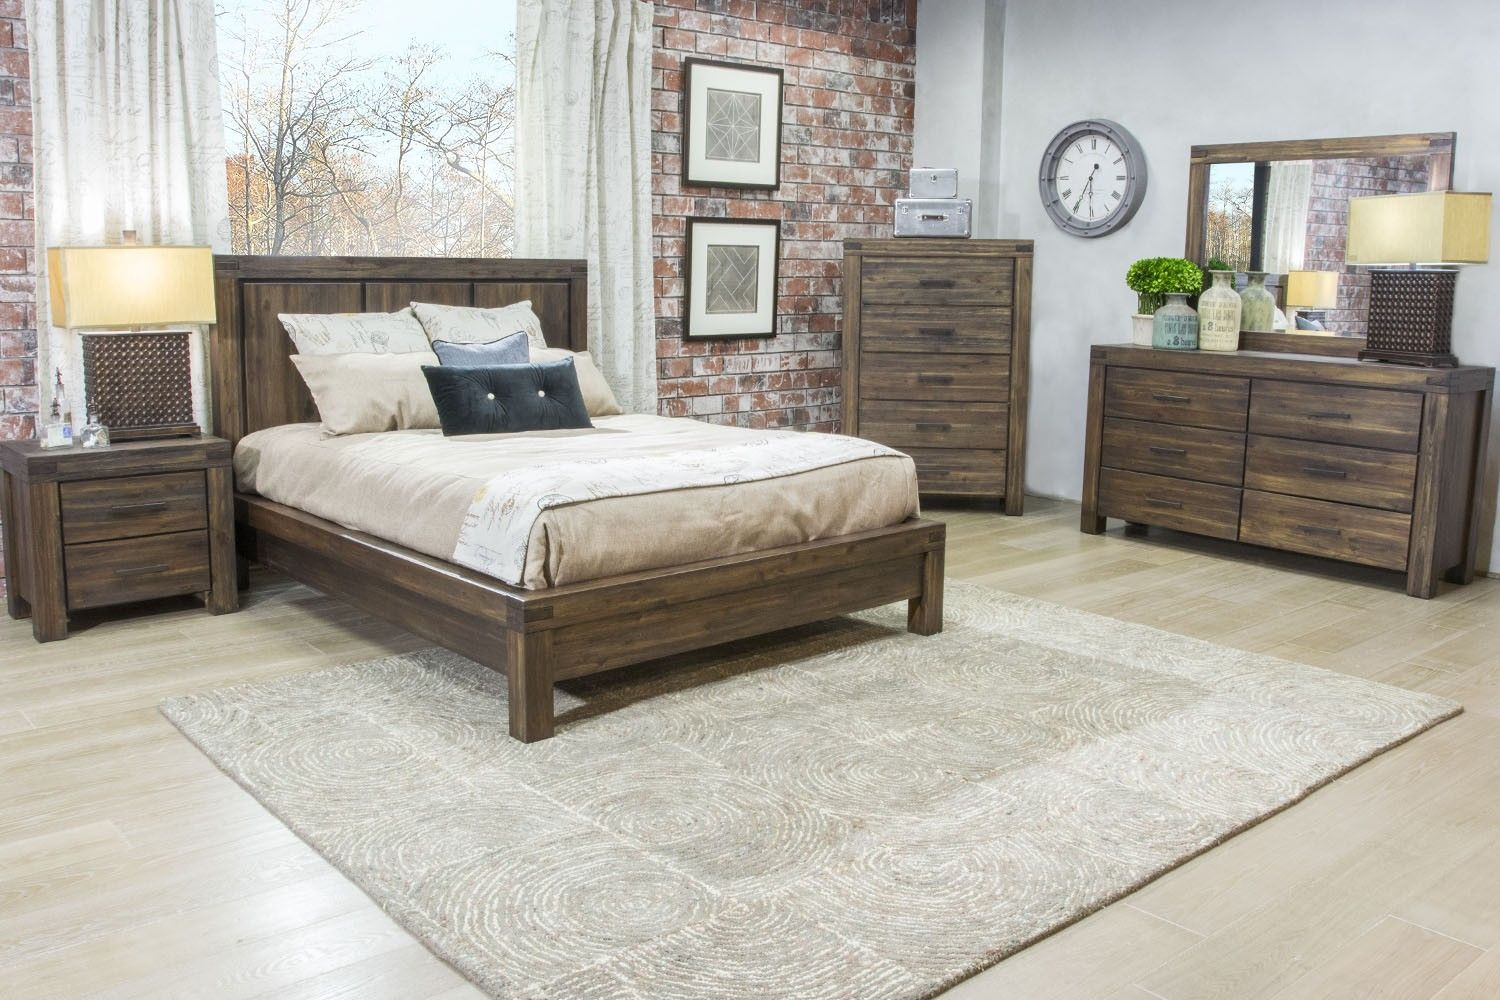 bedrooms at mor furniture for less